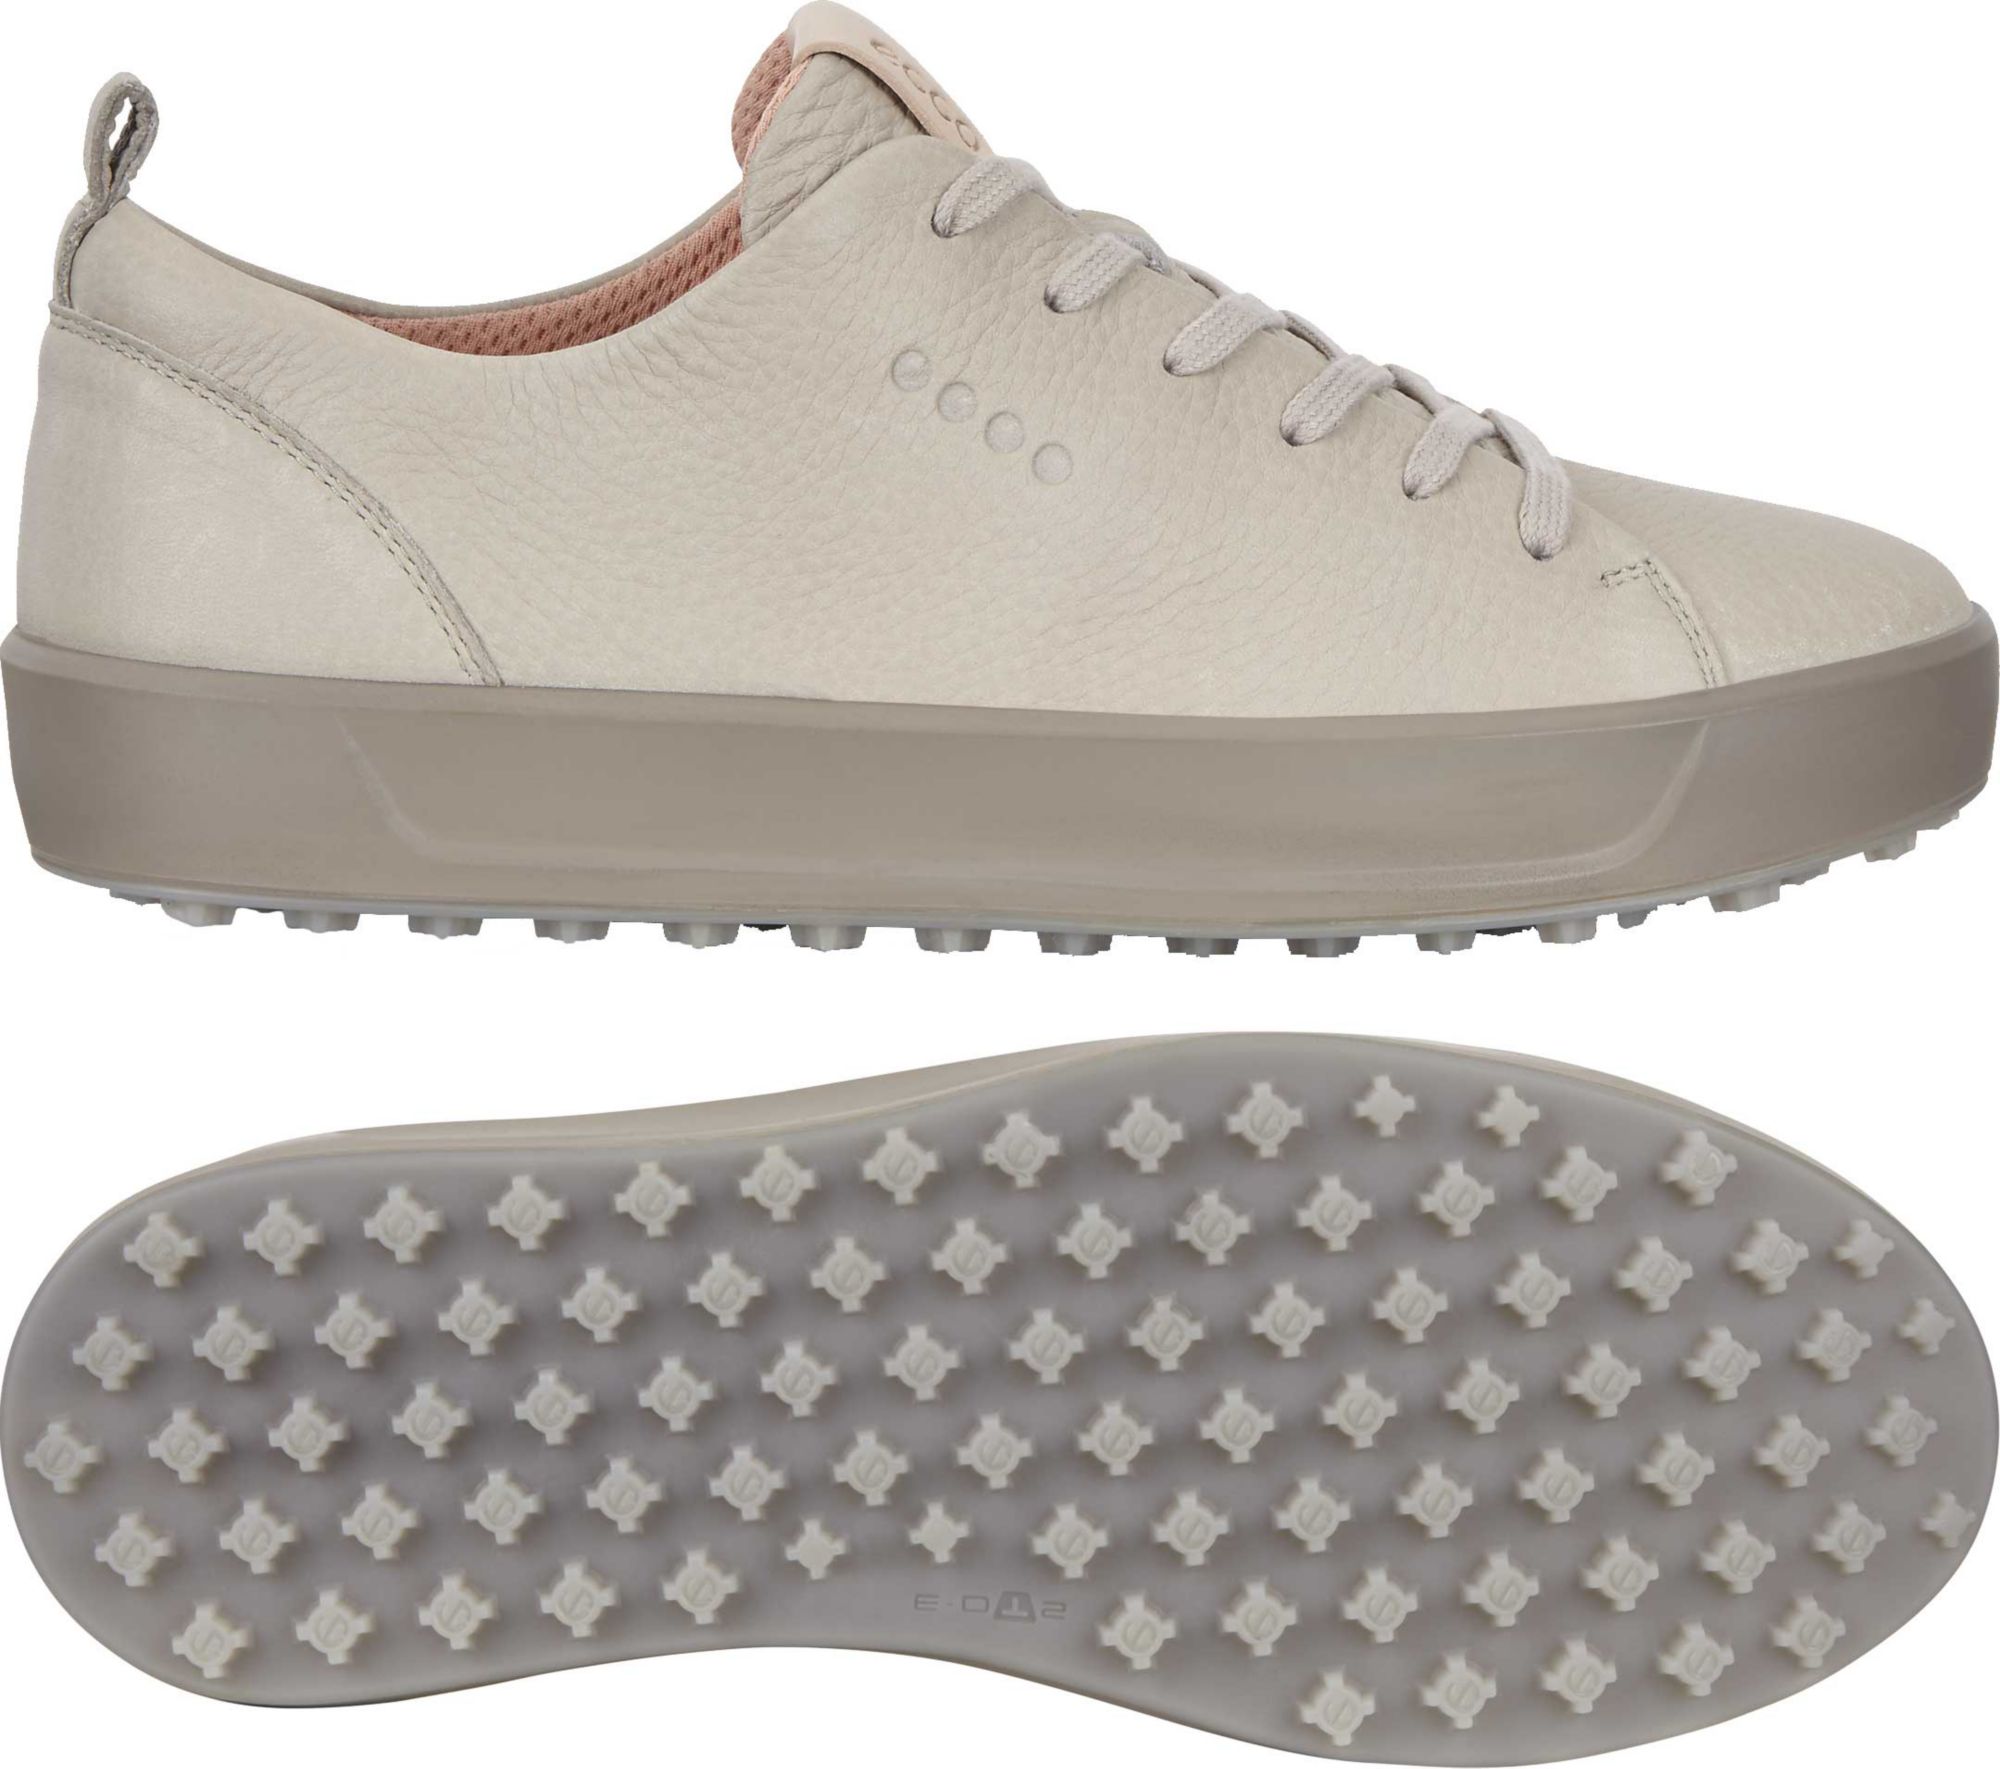 ECCO Women's Casual Hybrid Golf Shoes - image 1 of 8